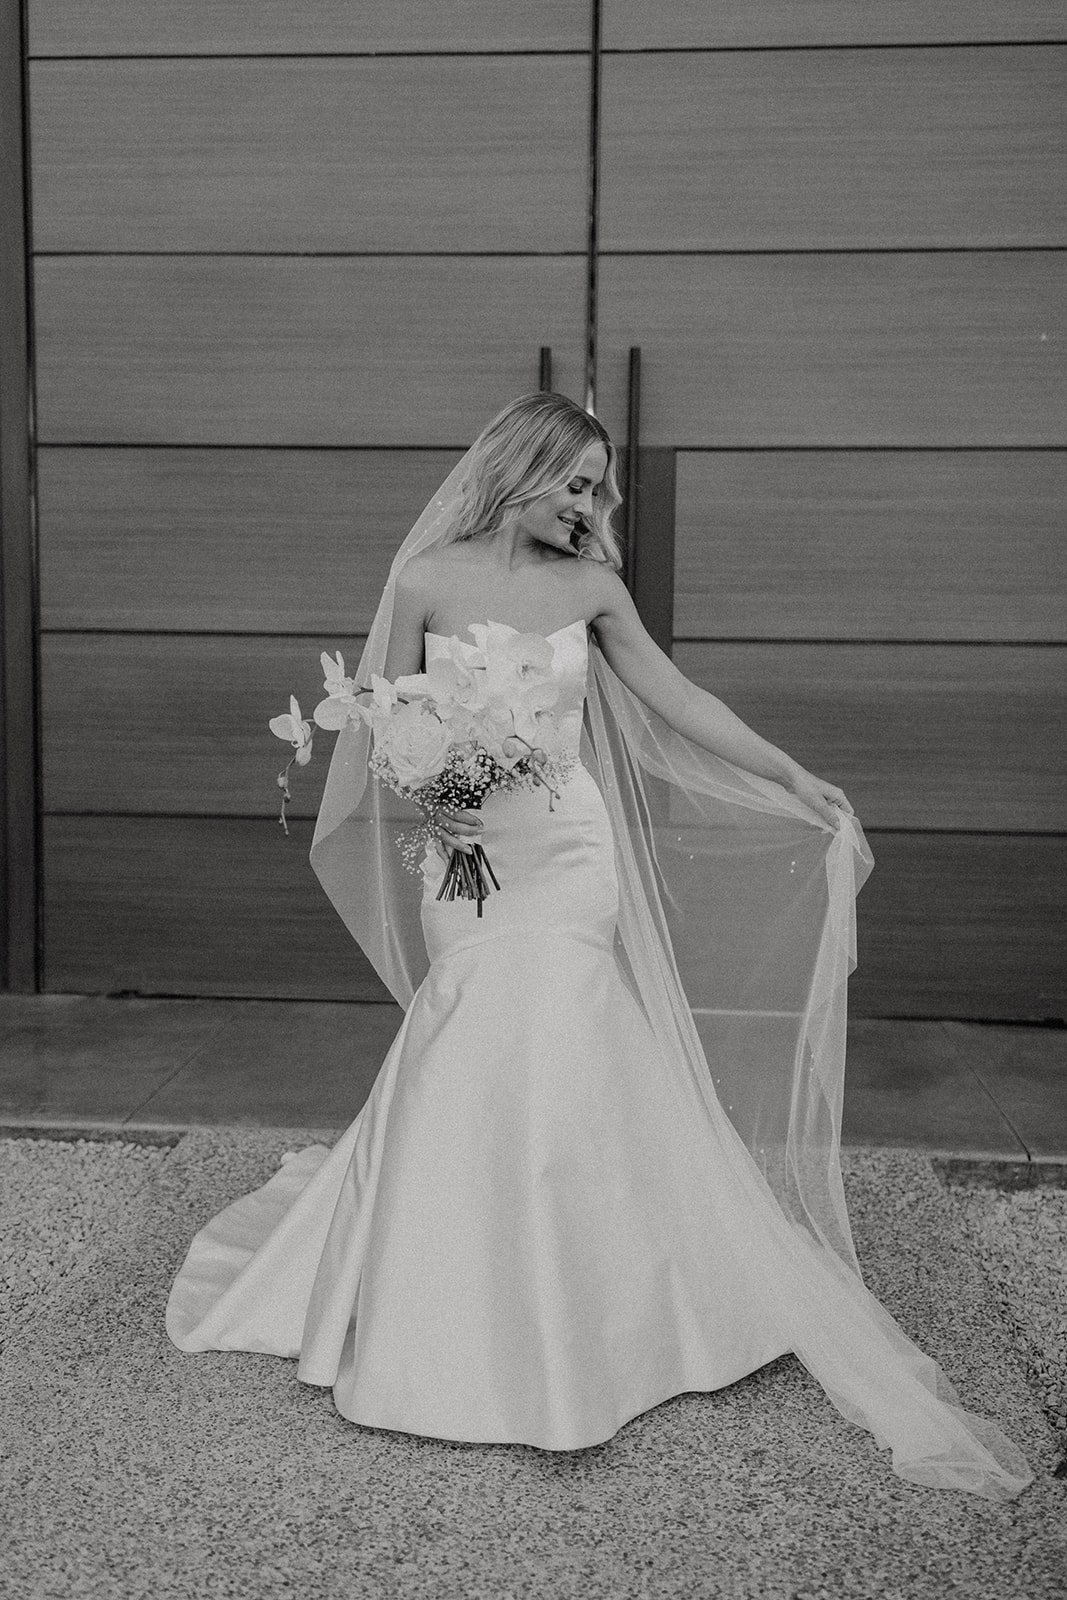 Bride lifting her veil to the side while holding a floral wedding bouquet